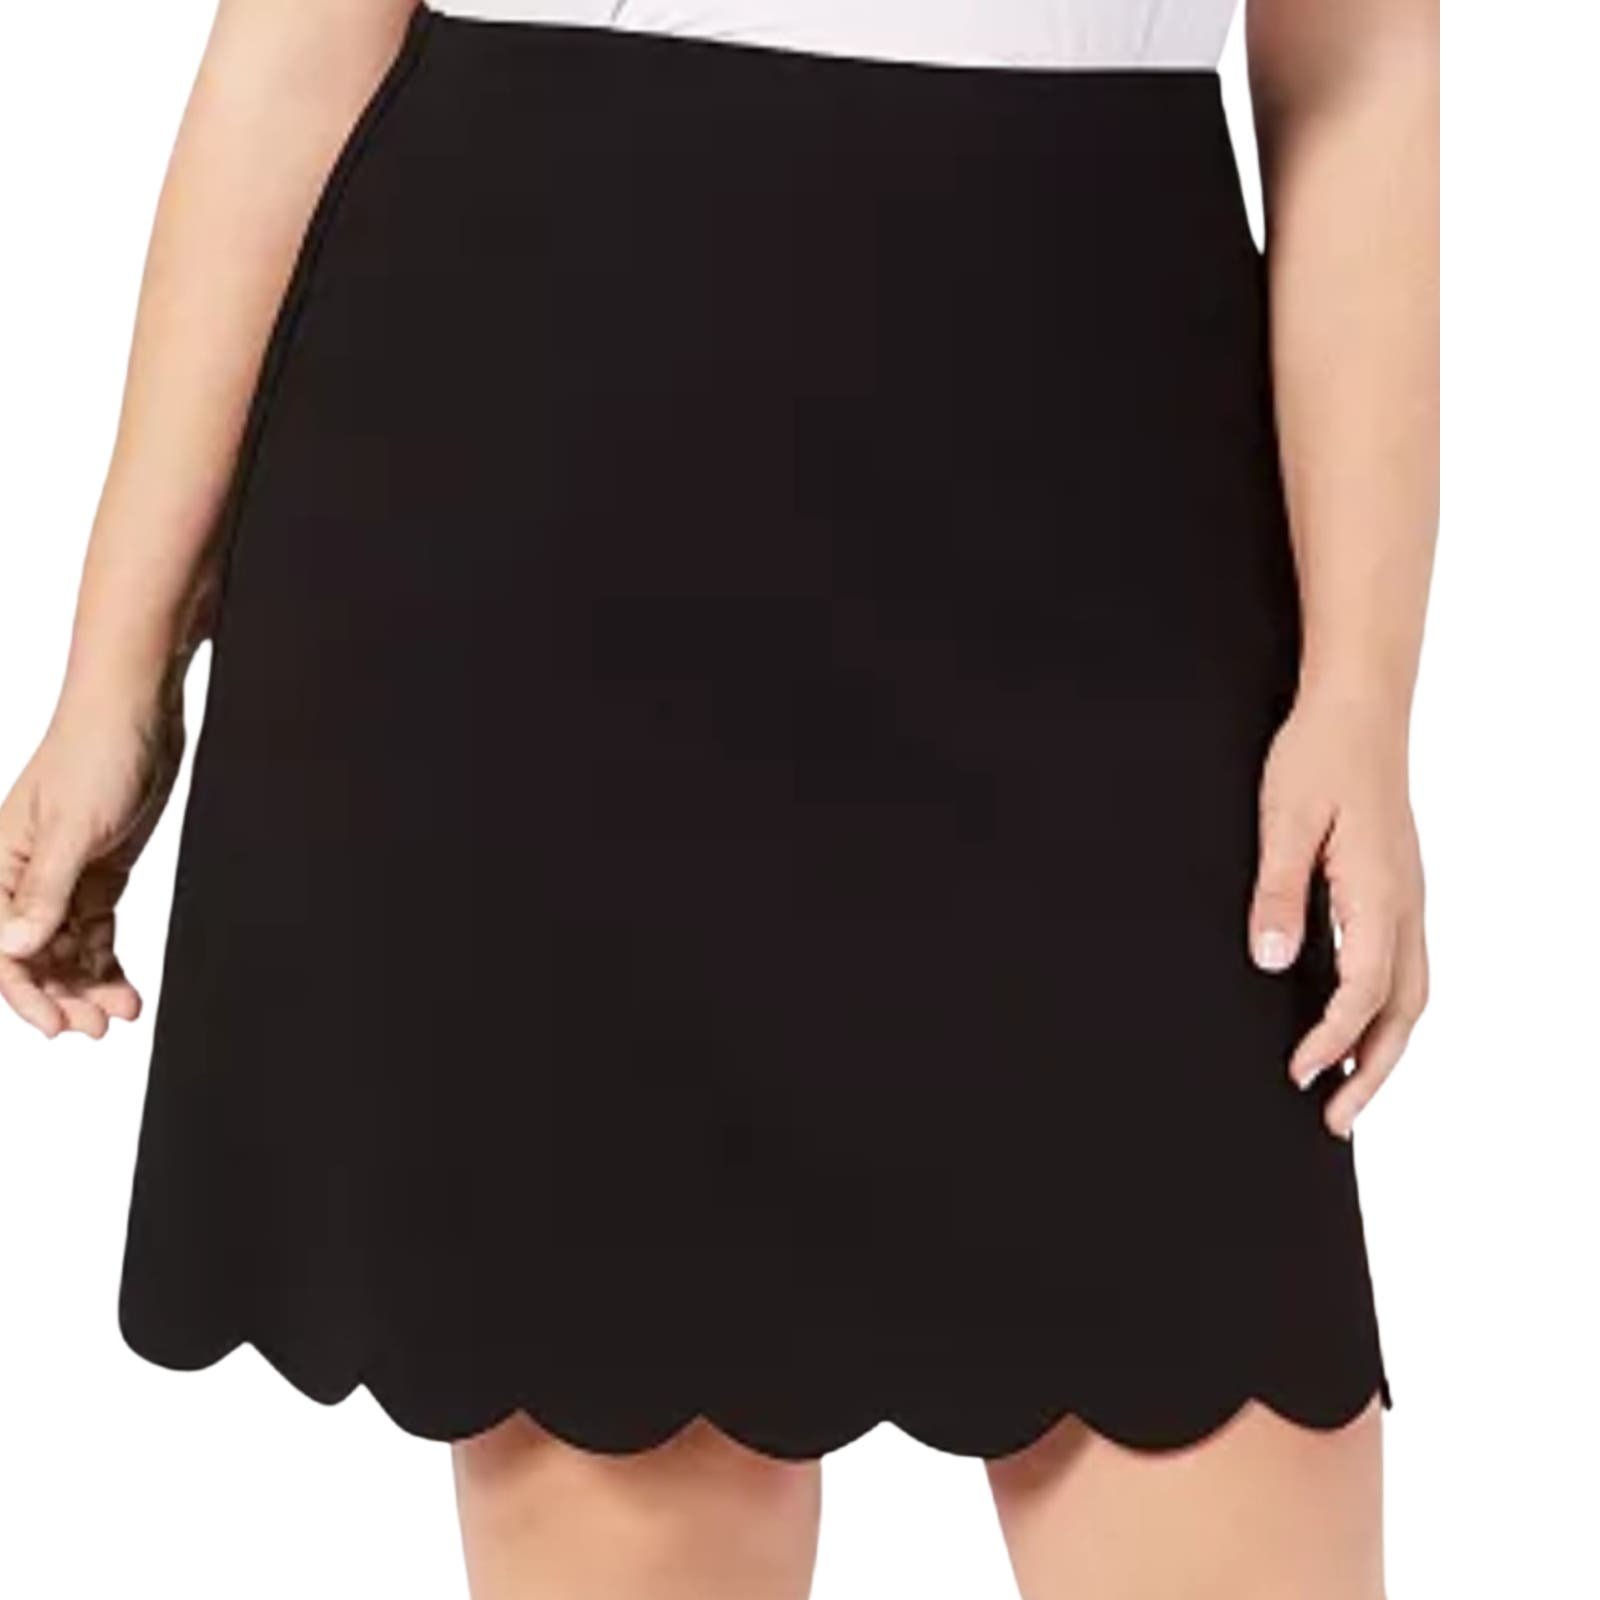 Fashion Trendy Scalloped A-Line Skirt Size 2X New with Tags OVlm5EN1E Low Price